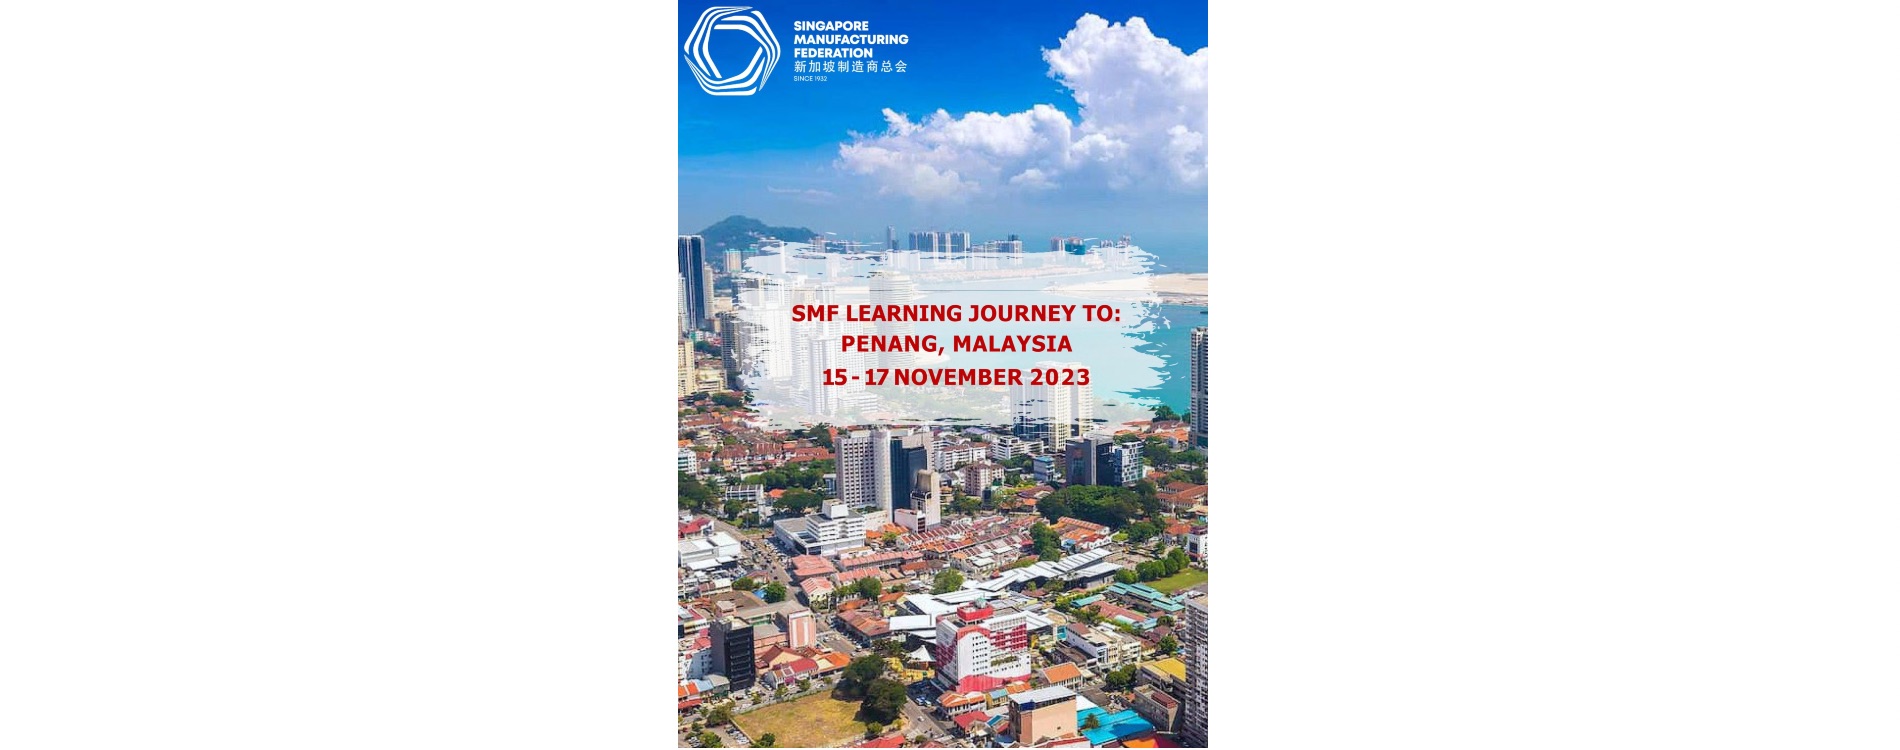 SMF Learning Journey To Penang Malaysia